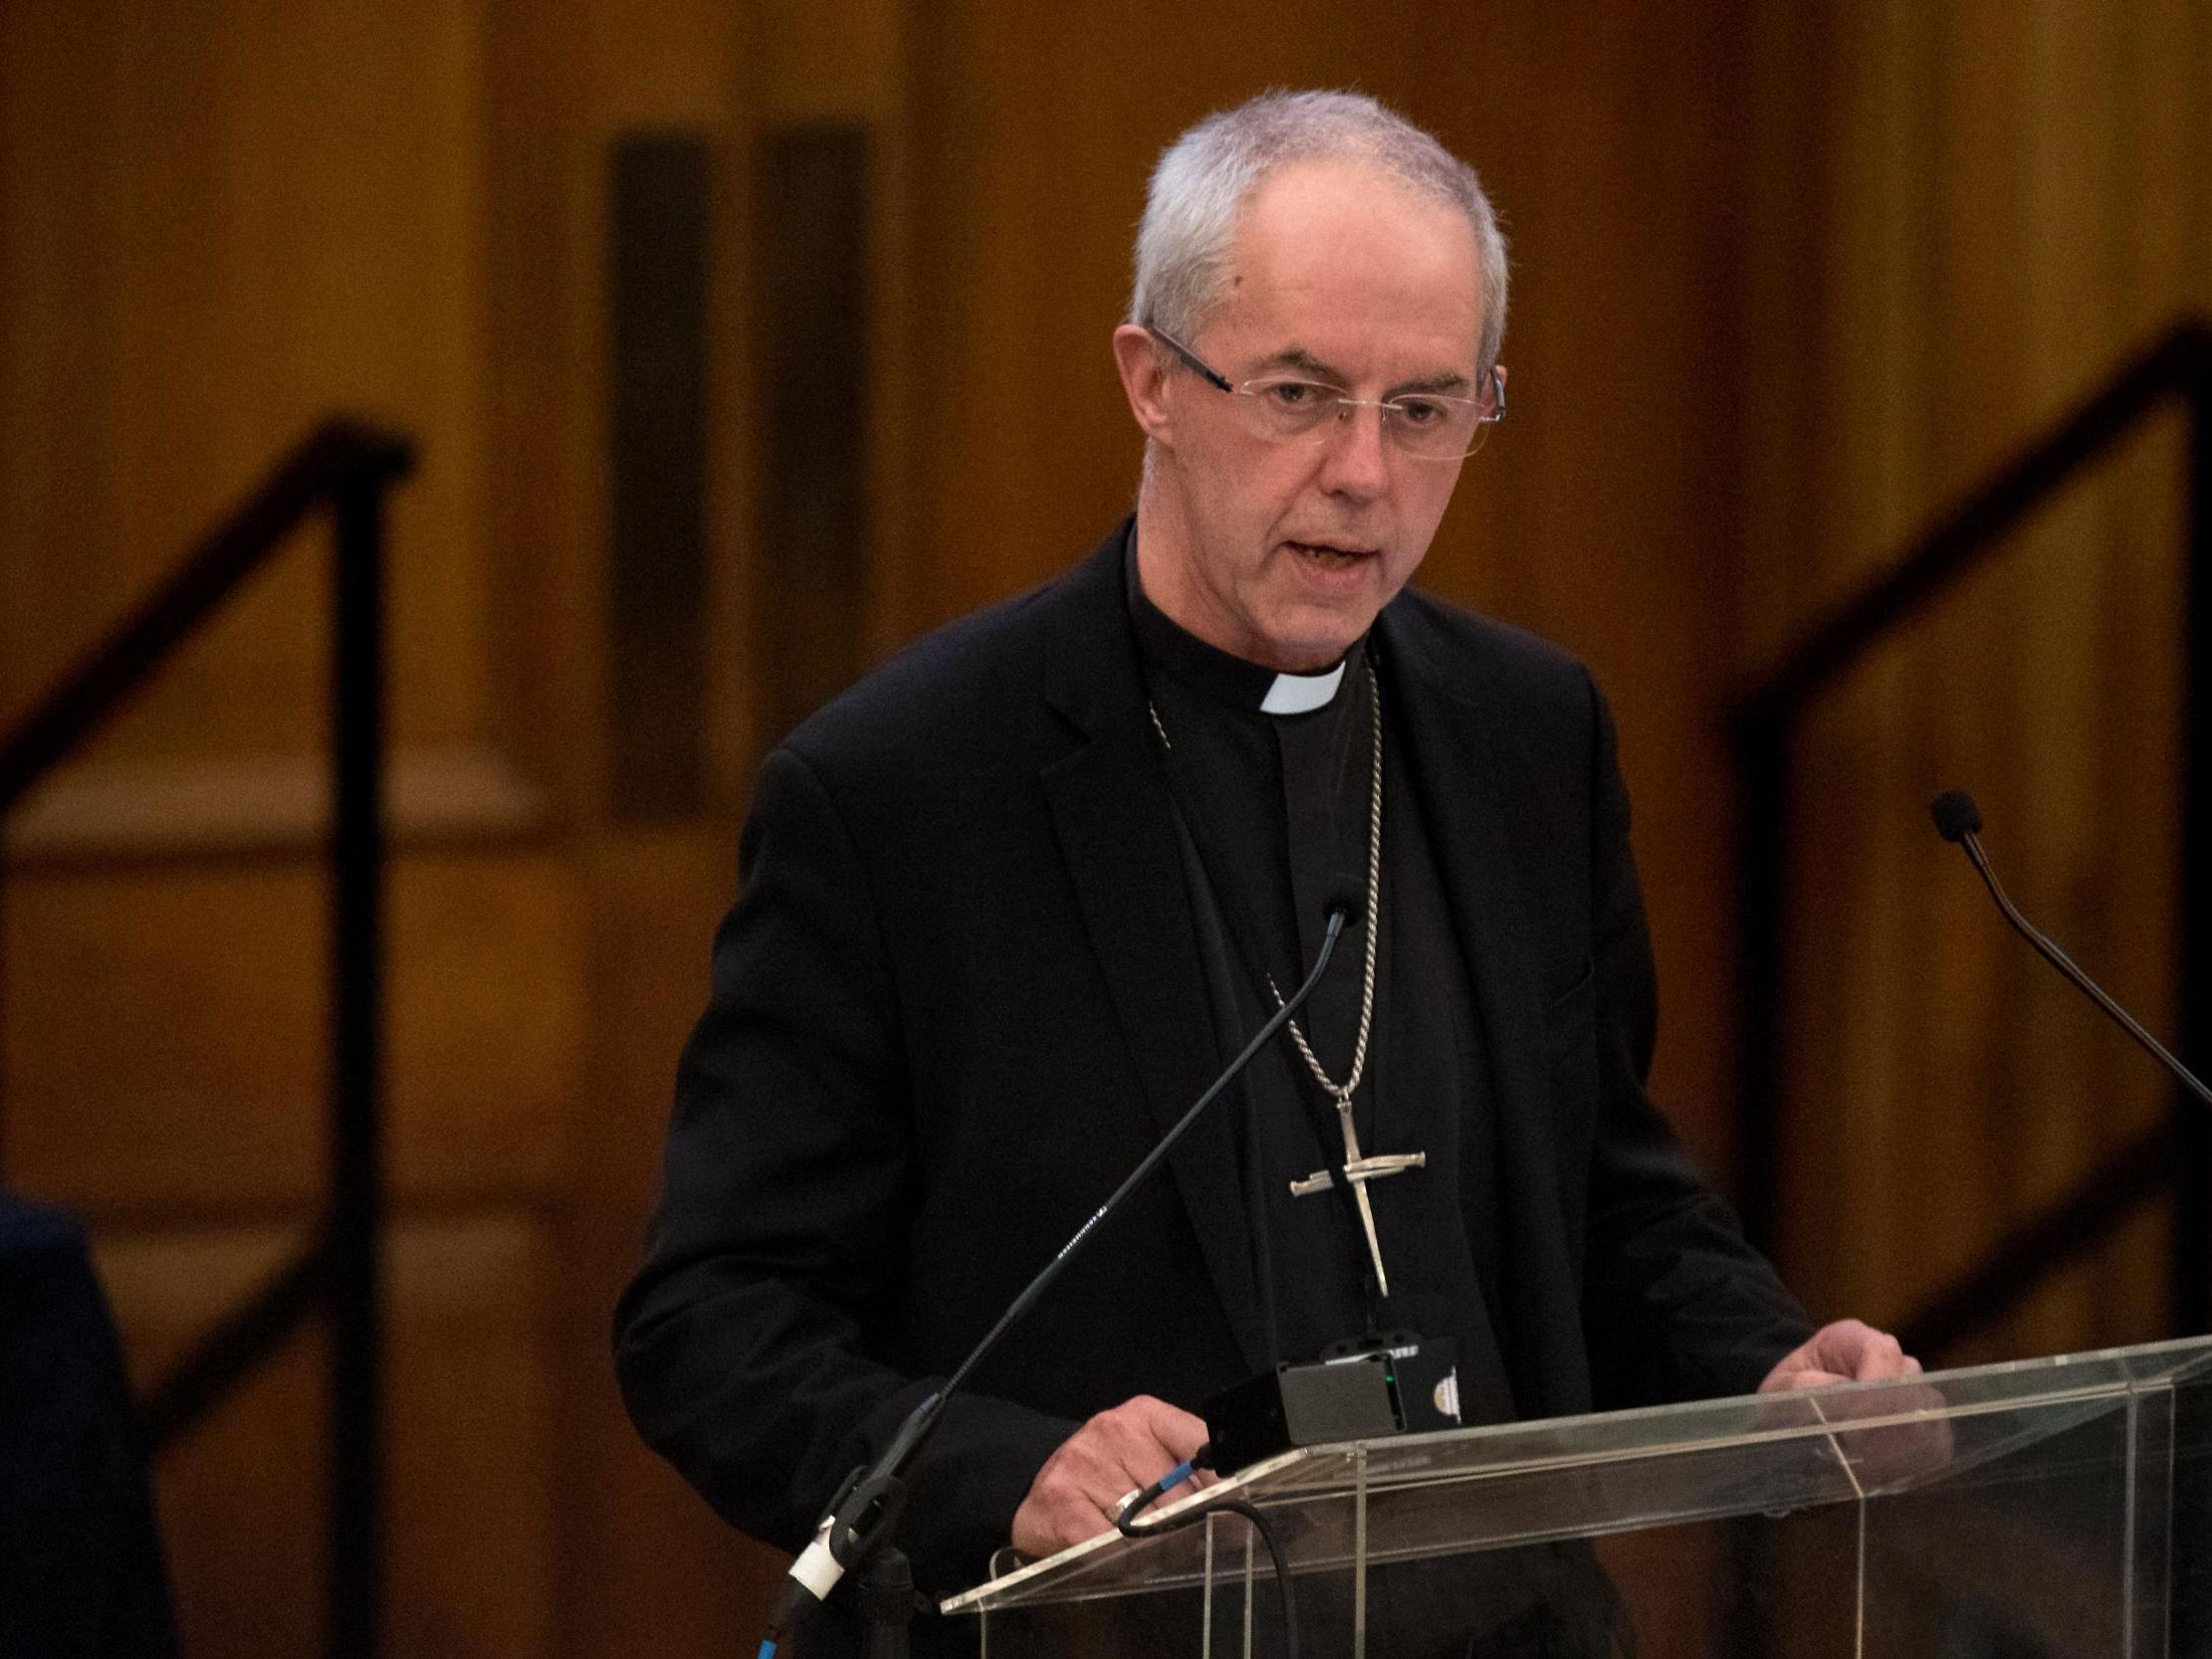 The Archbishop of Canterbury was speaking to The Big Issue